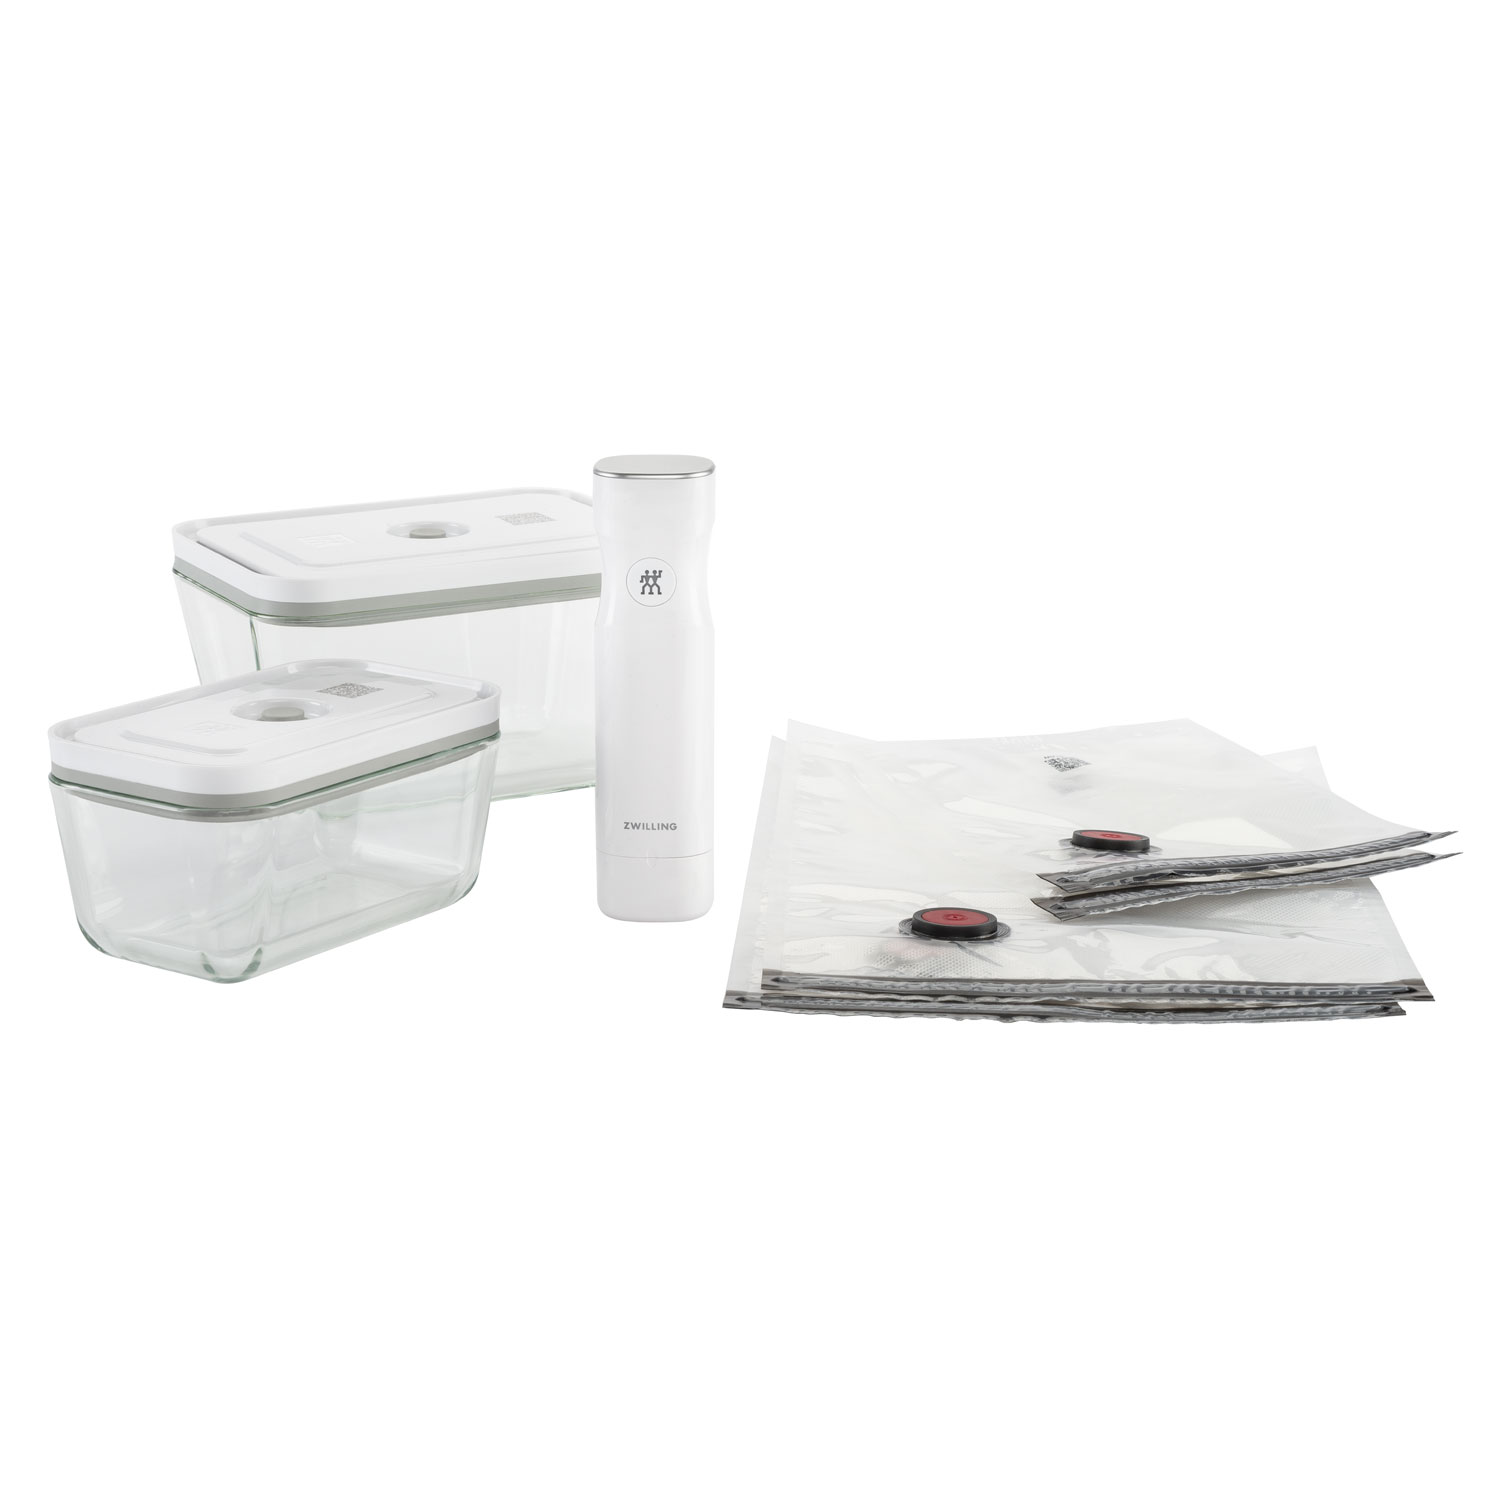 https://api-prod.royaldesign.se/api/products/image/2/zwilling-fresh-save-starter-kit-with-vacuum-pump-bags-containers-in-glass-7-pieces-0